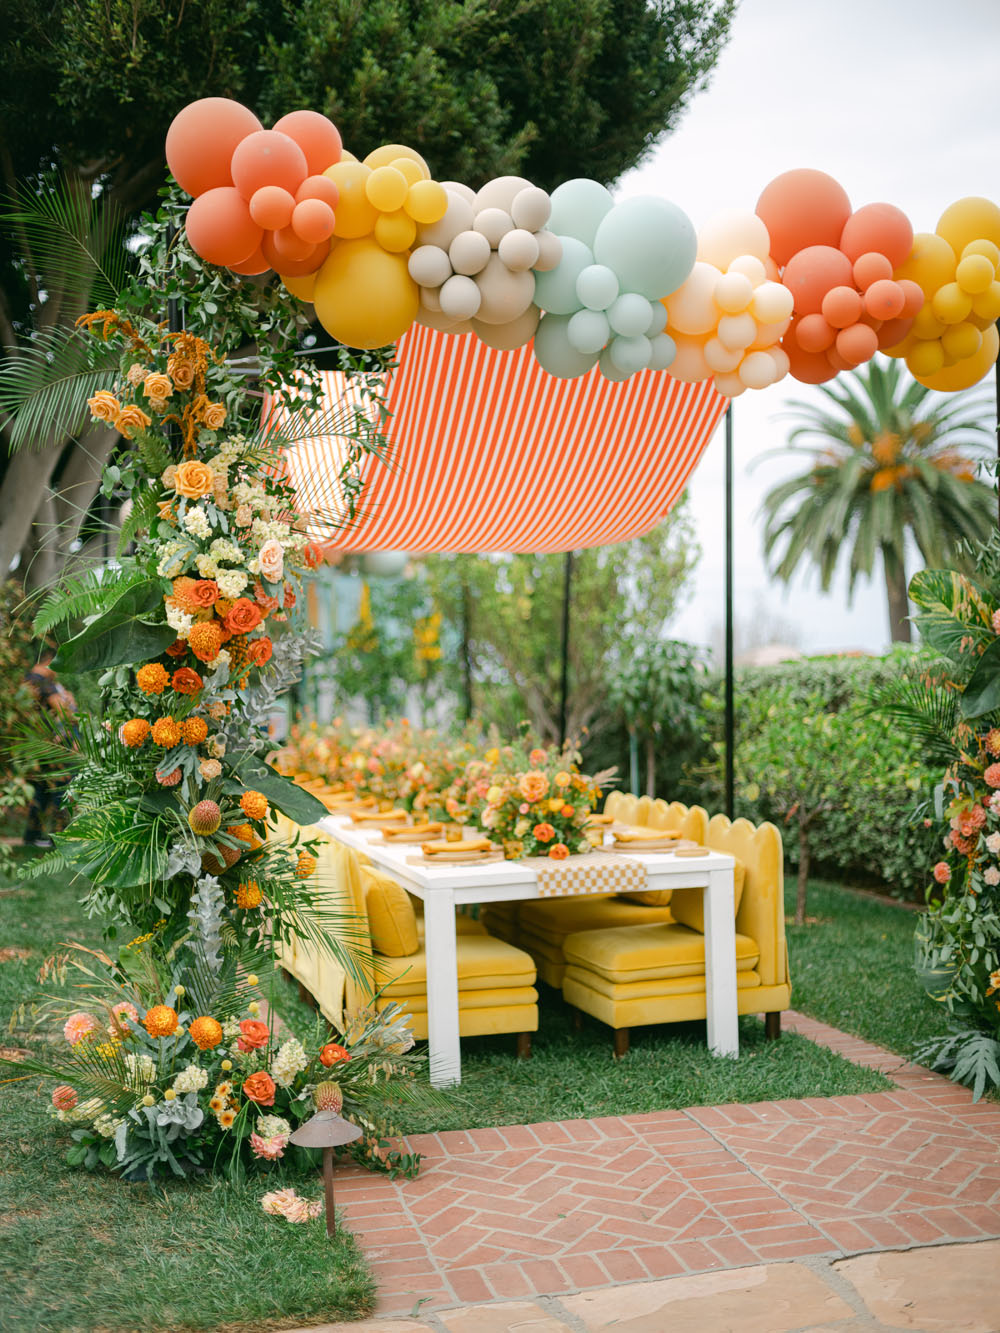 colorful balloon and golden yellow table for party decor